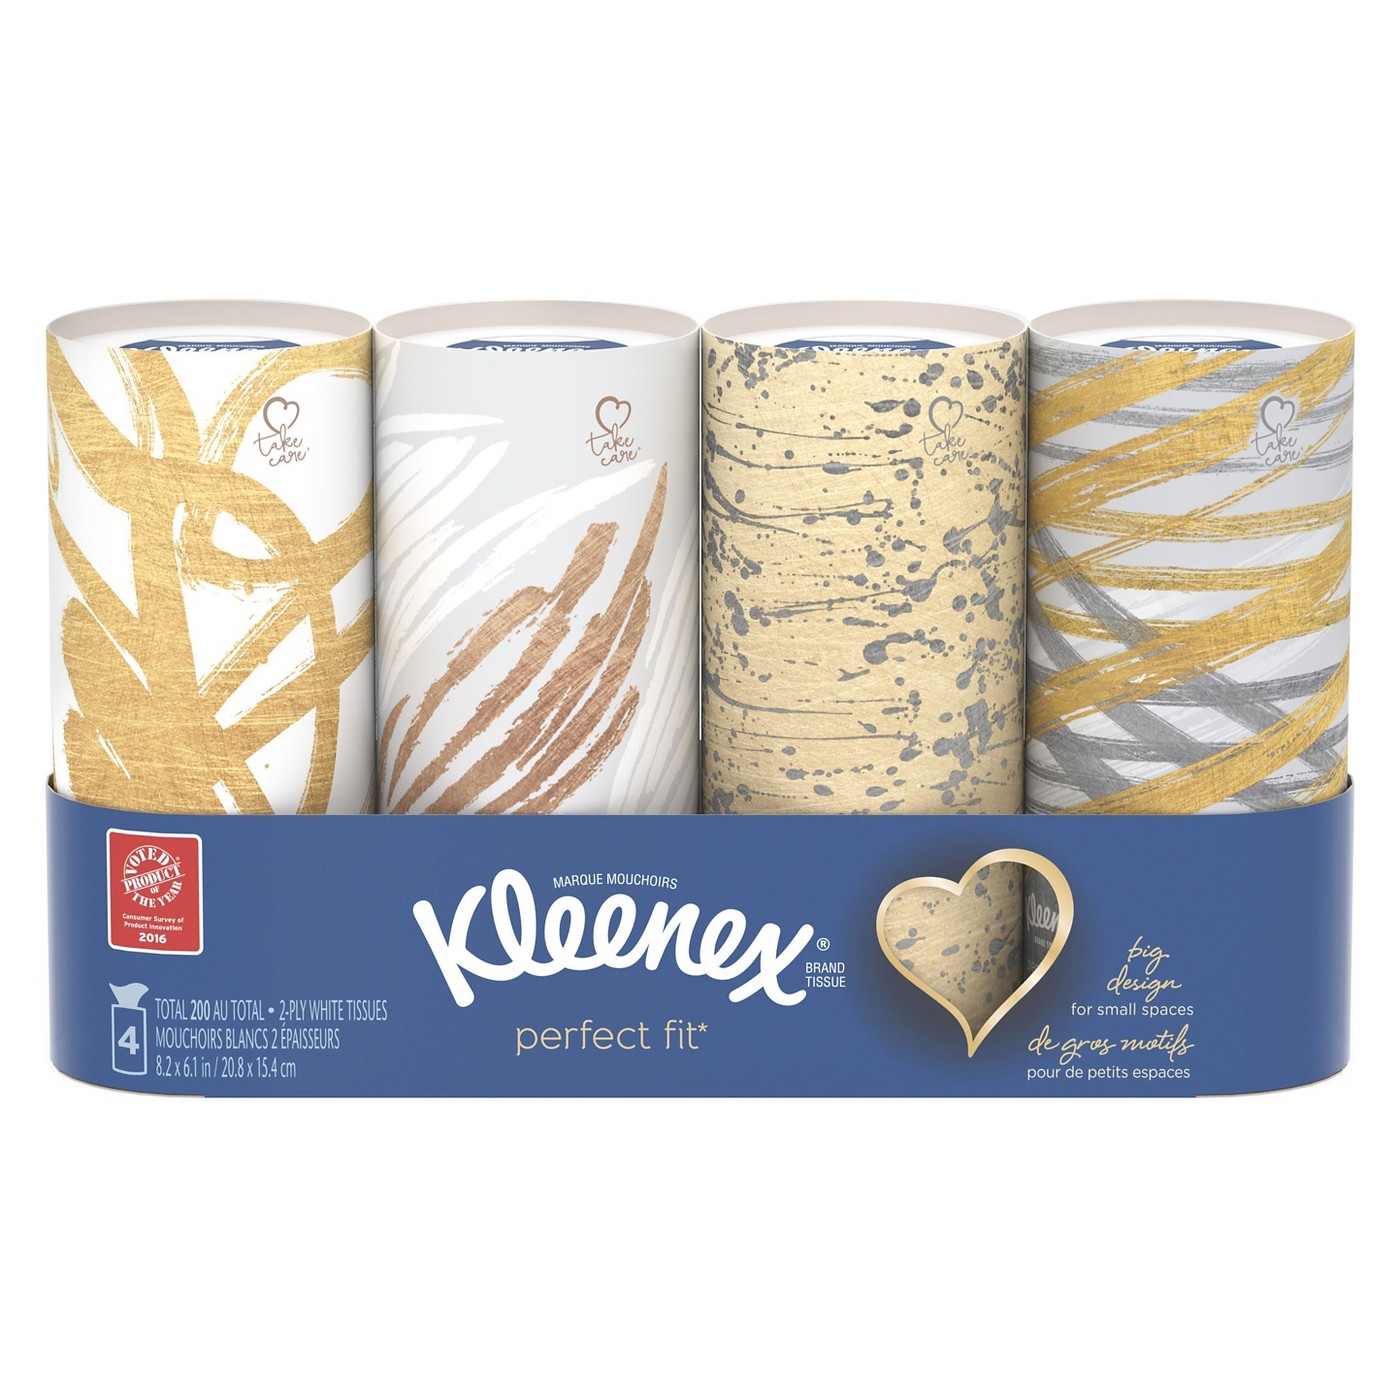 Kleenex Perfect Fit Facial Tissue - 4pk - image 1 of 5